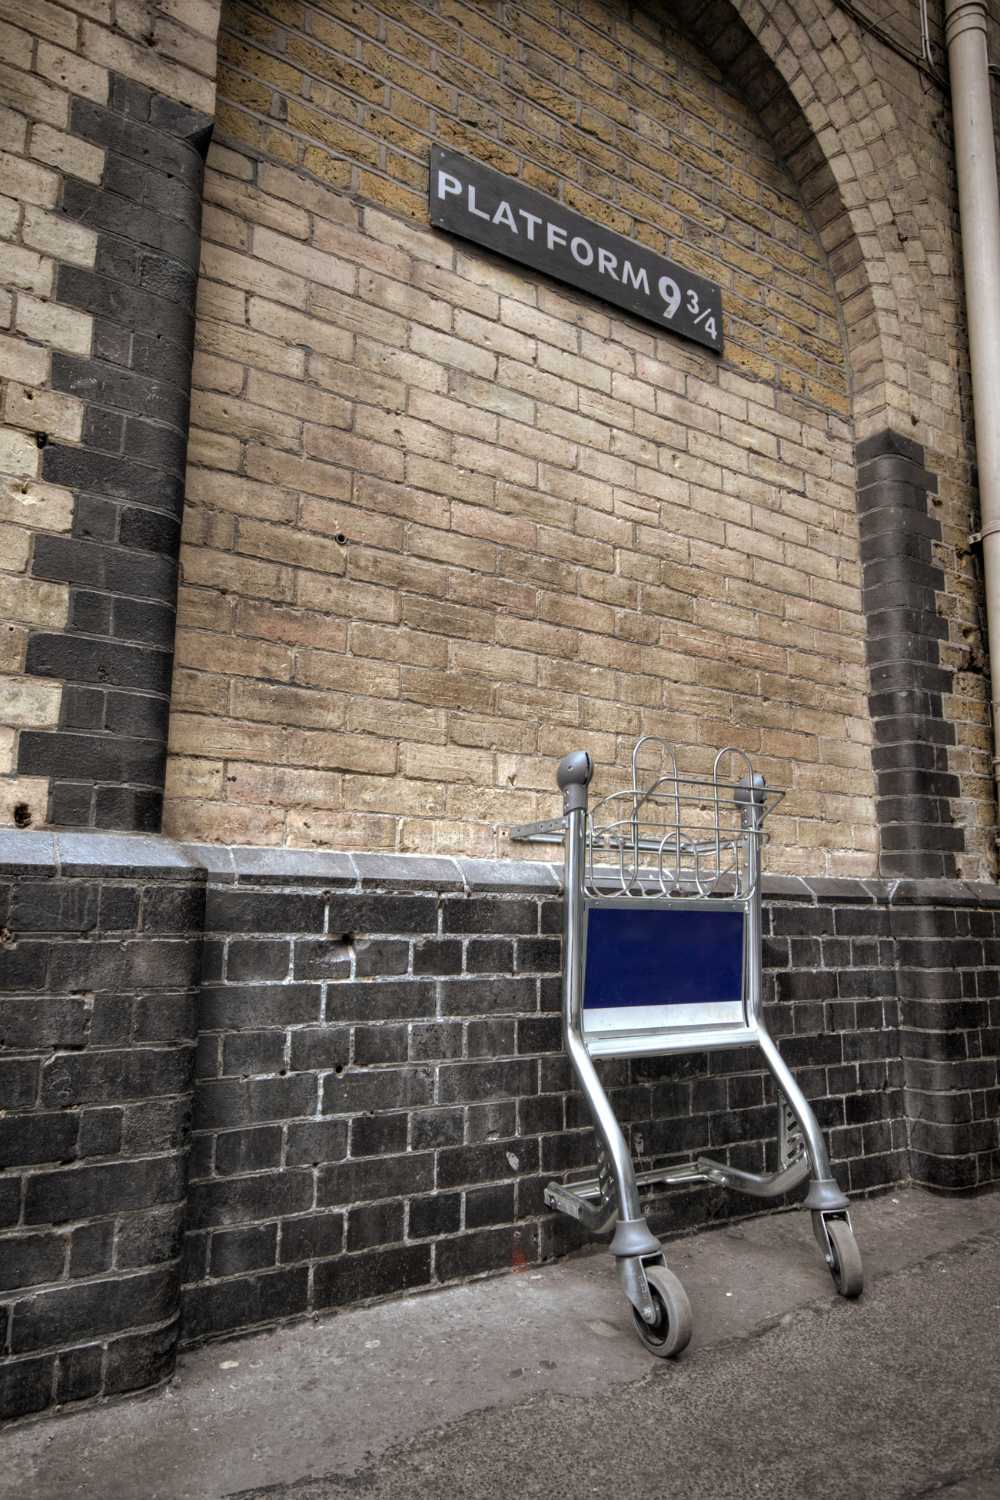 weird places, visit london, weird places to visit in london, Platform 9 3/4